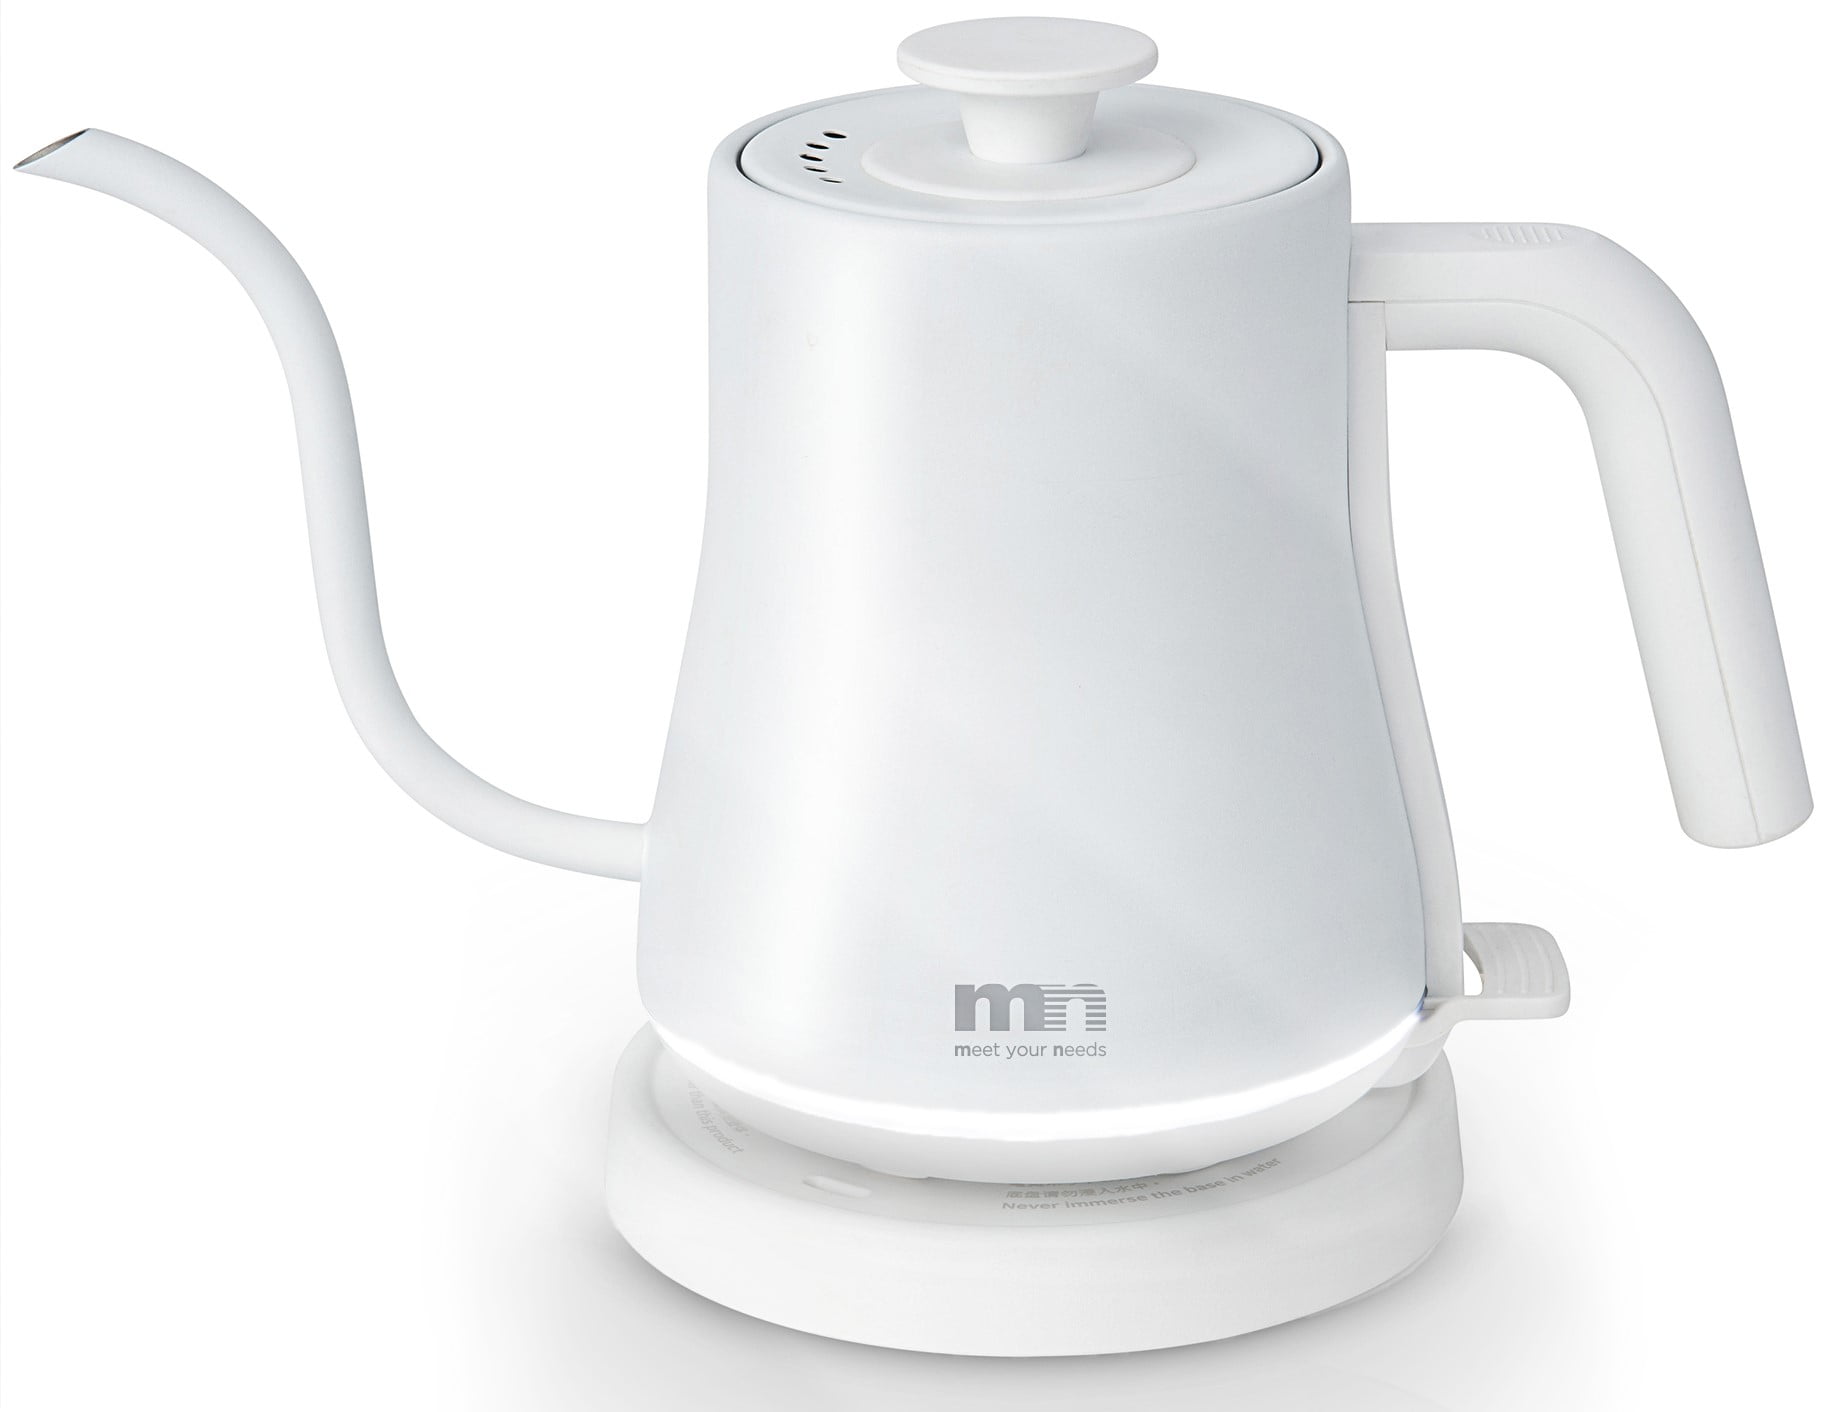 Comment KETTLE for Link in your DM's. This Electric Tea Kettle has been a  family favorite for the last three years. My boys use it for…